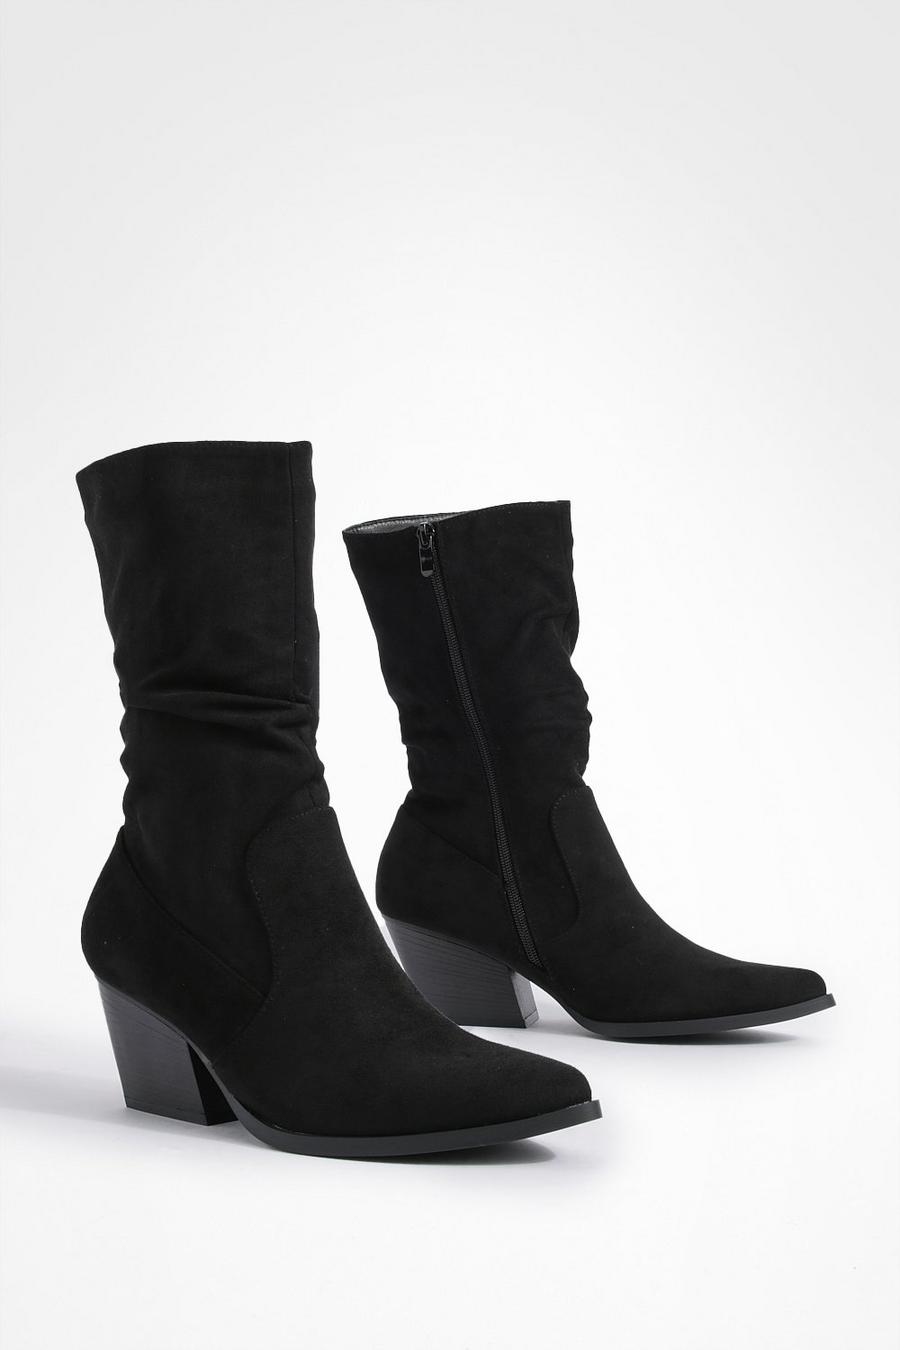 Ruched Casual Ankle Cowboy Boots